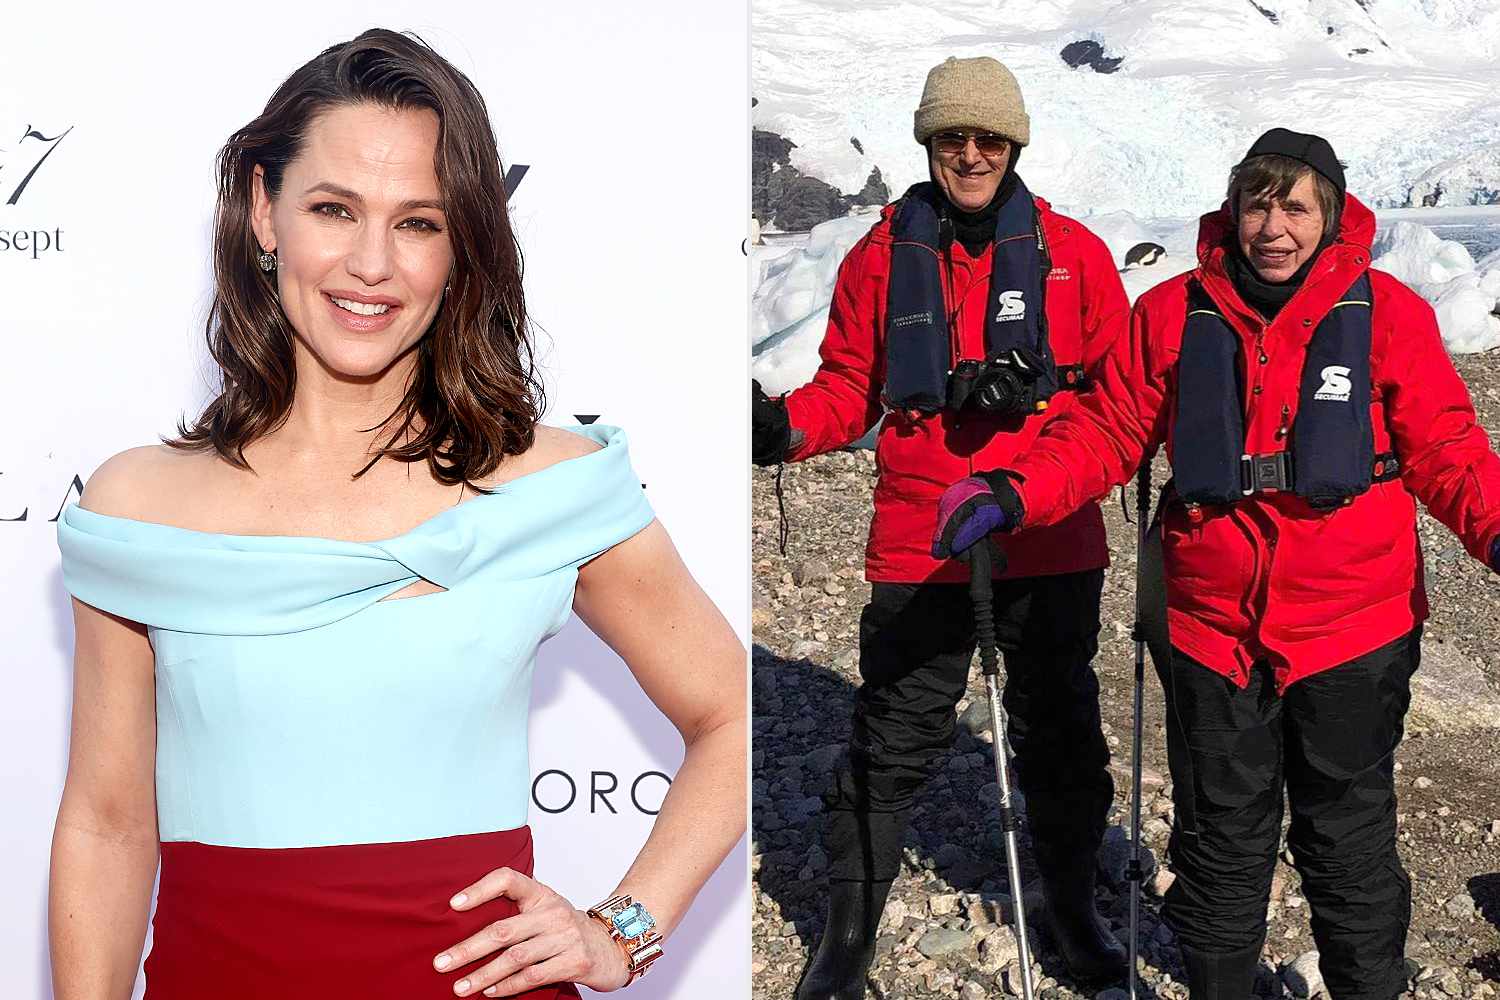 Jennifer Garner Reveals She Once Gifted Her Parents a Cruise to Antarctica: 'Merry Christmas'